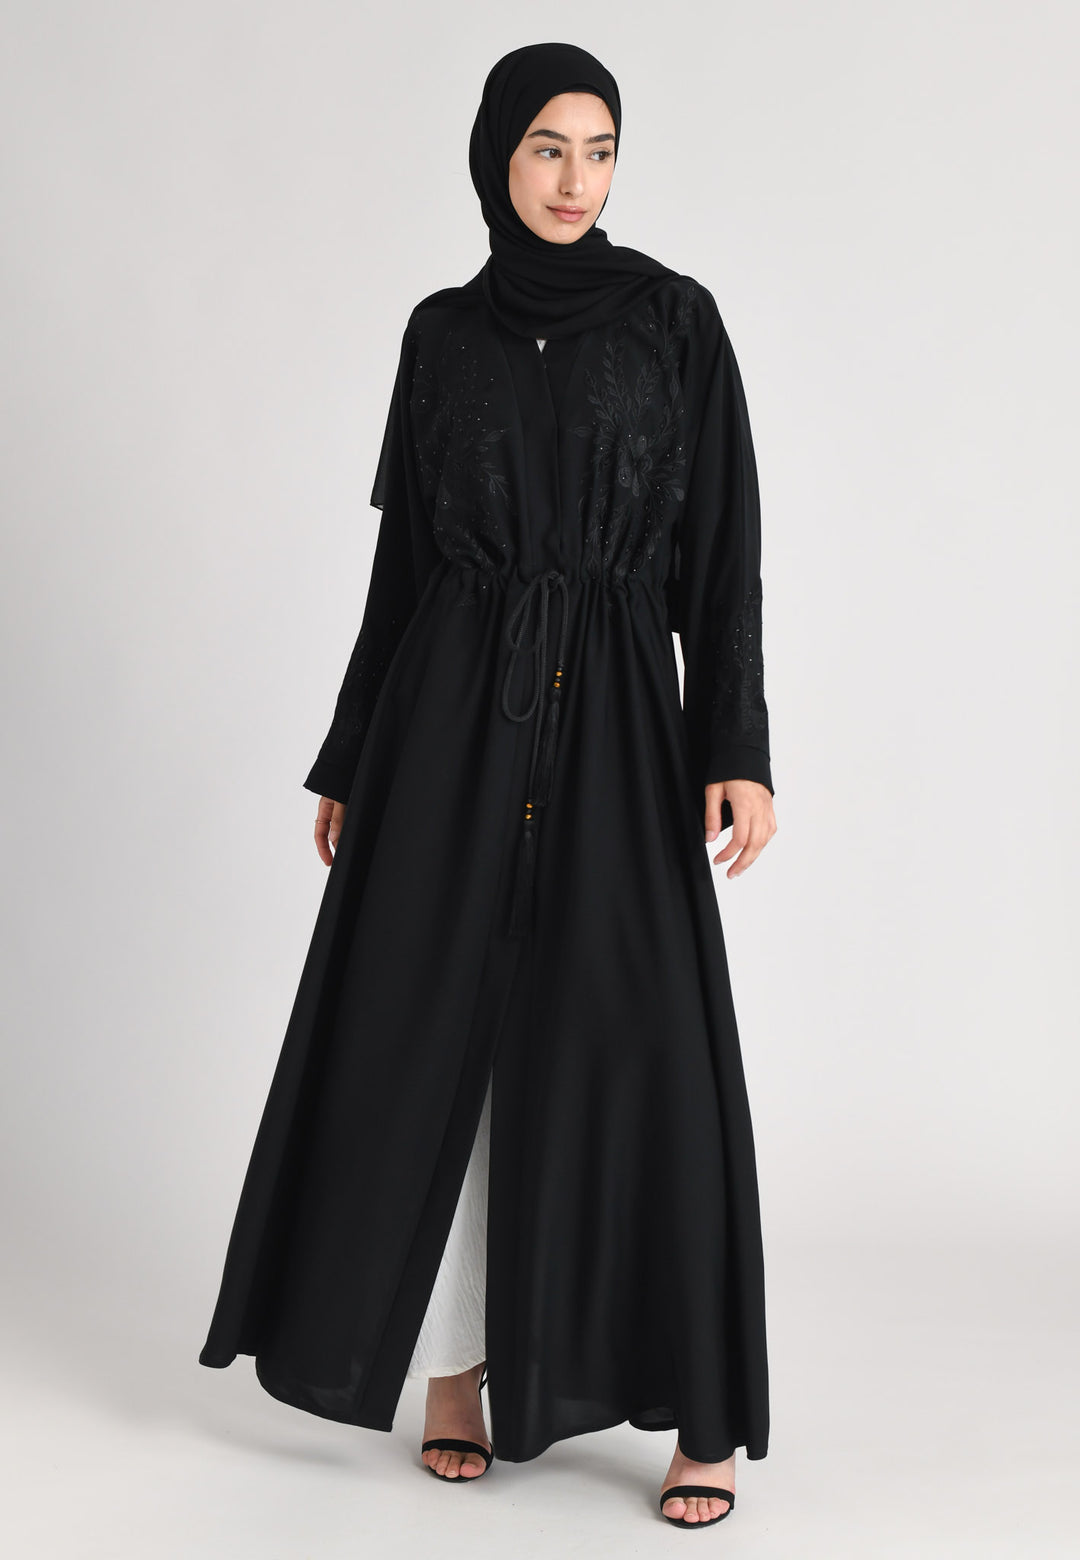 Raven A-Line Embroidered Open Abaya